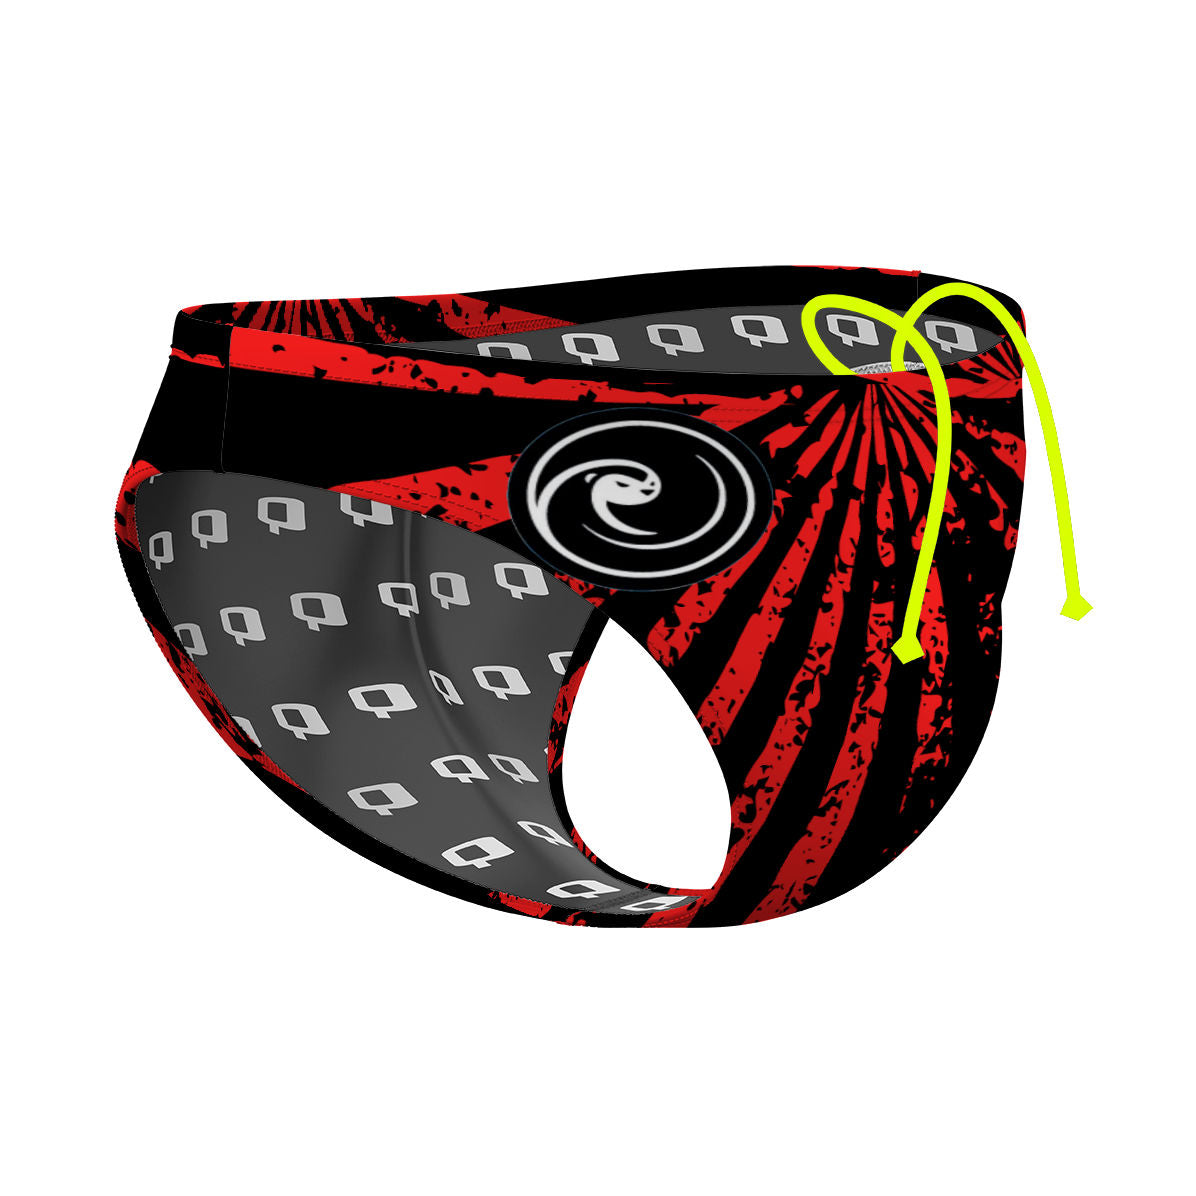 who - Waterpolo Brief Swimsuit